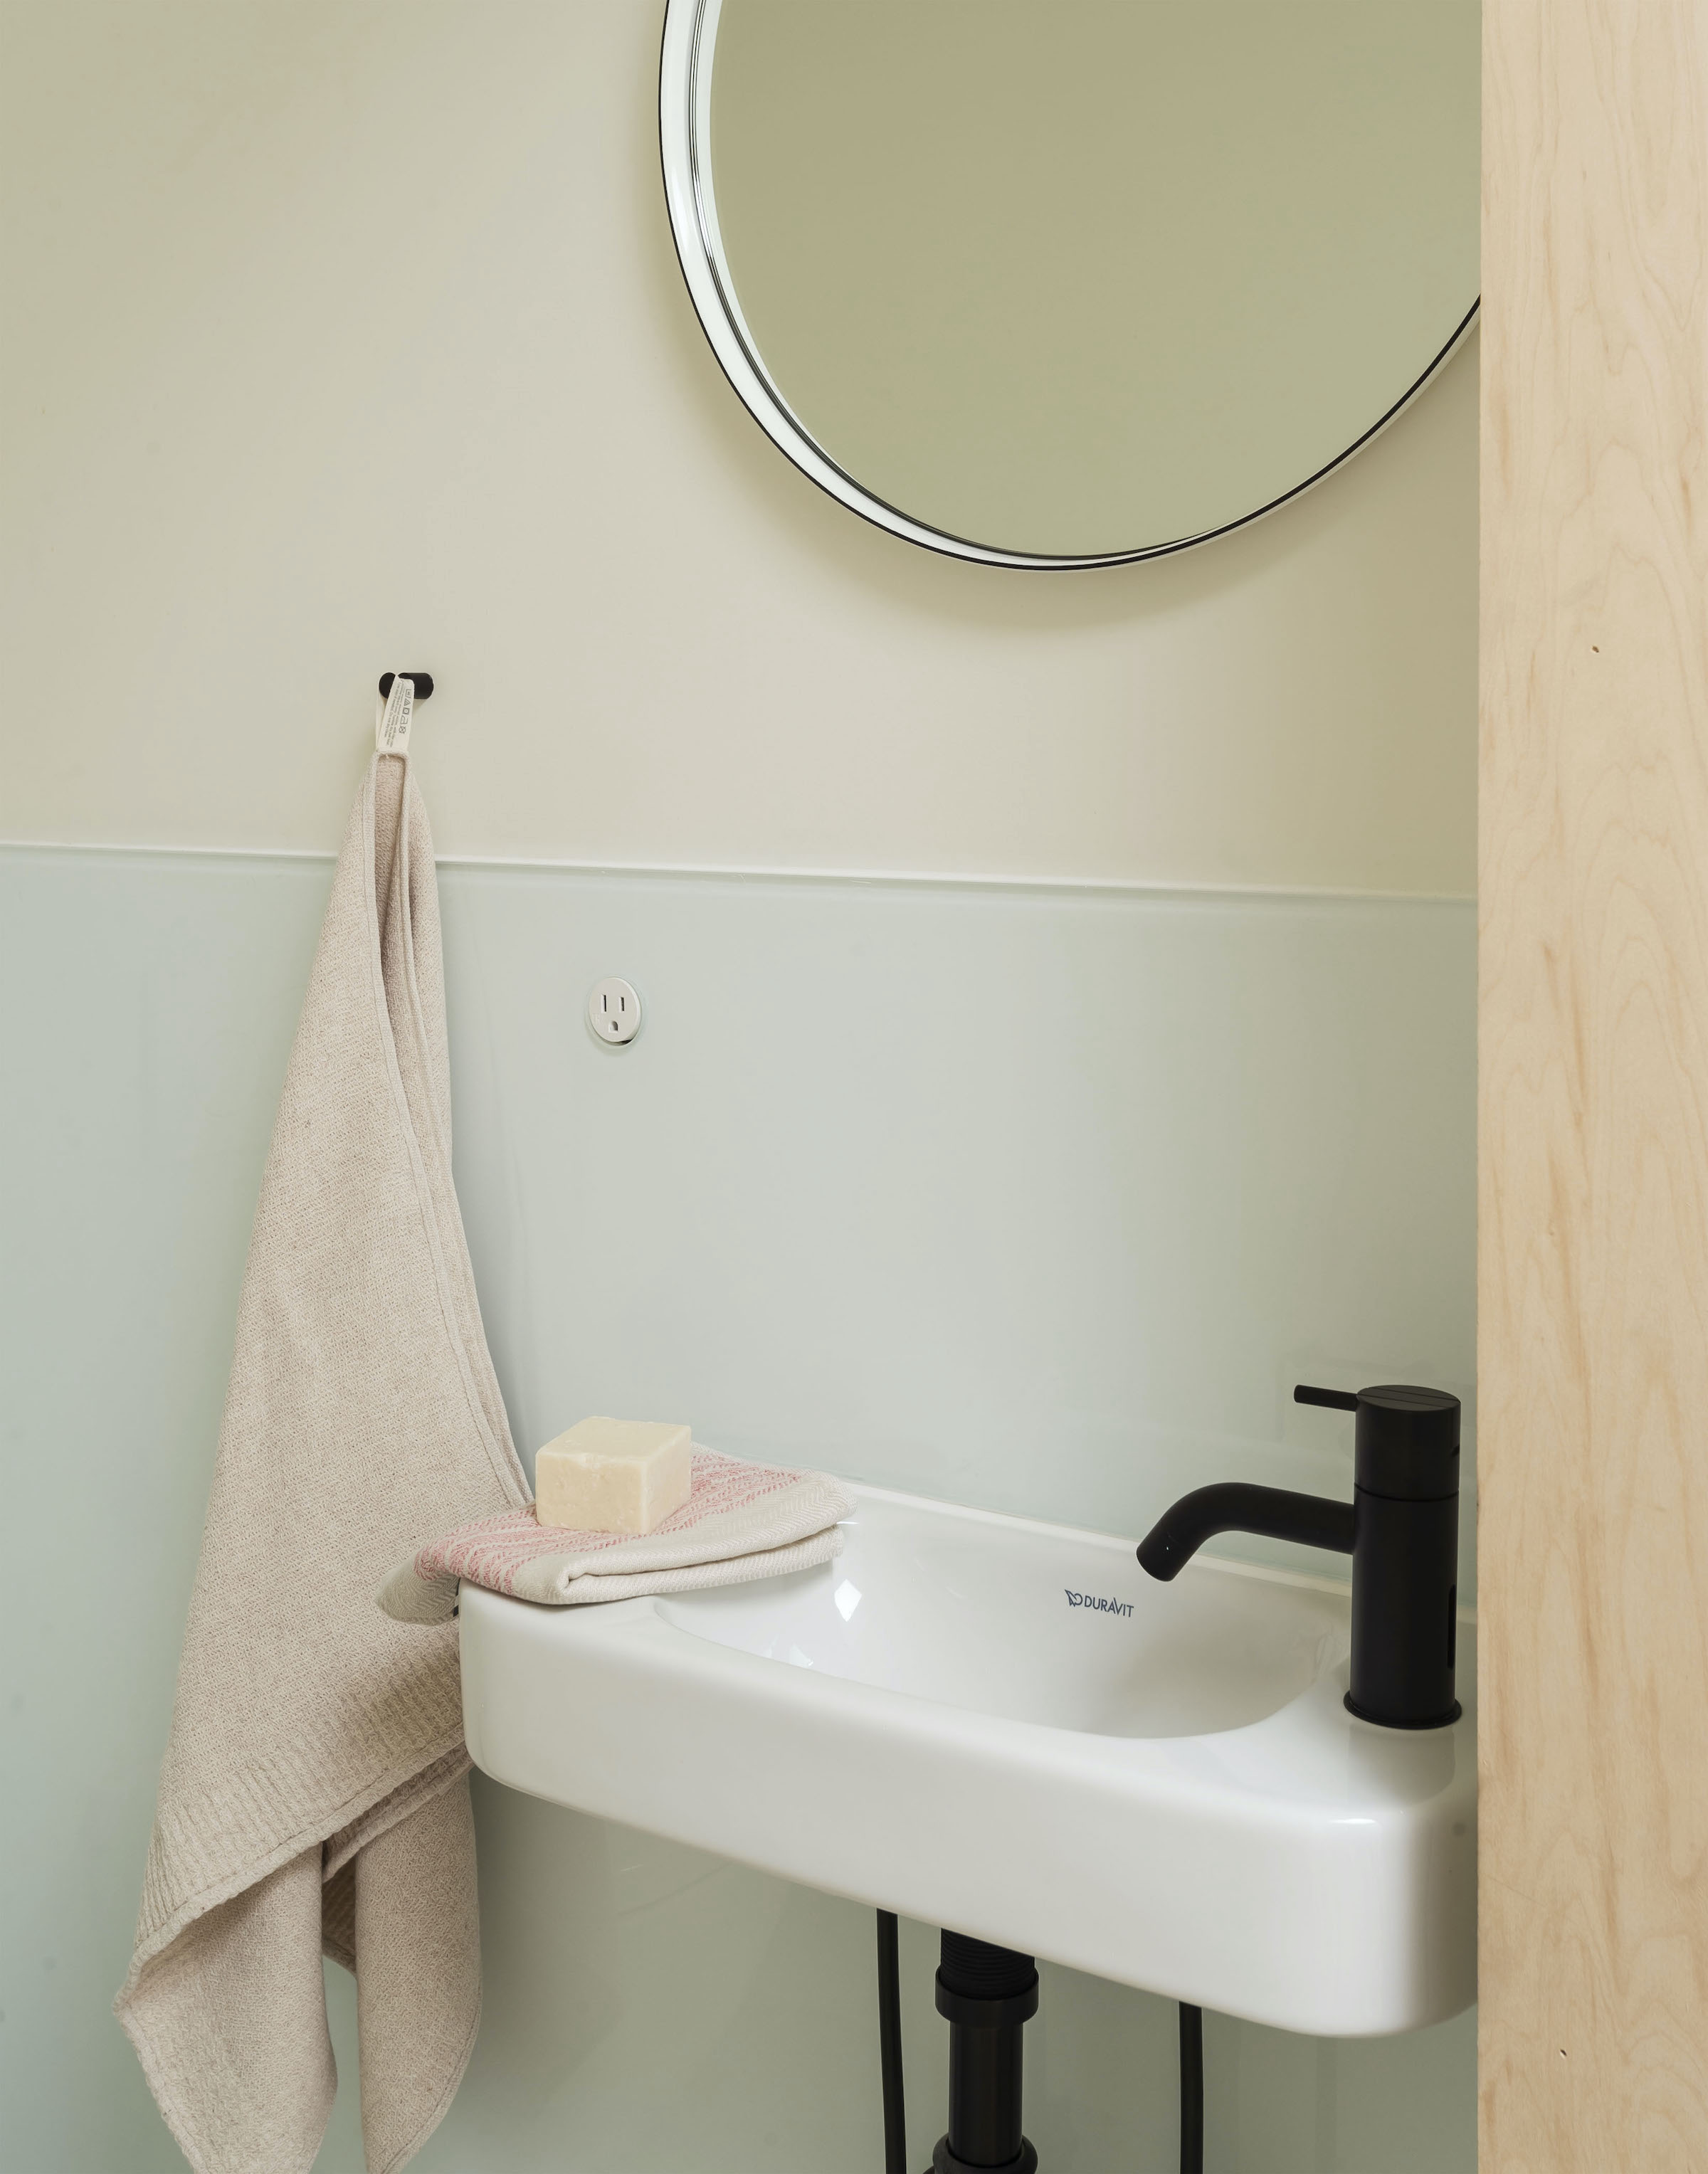 Tiny powder room in Bed Stuy passive house. architects Ruth Mandl and Bobby Johnston of CO Adaptive. Matthew Williams for Remodelista photo.